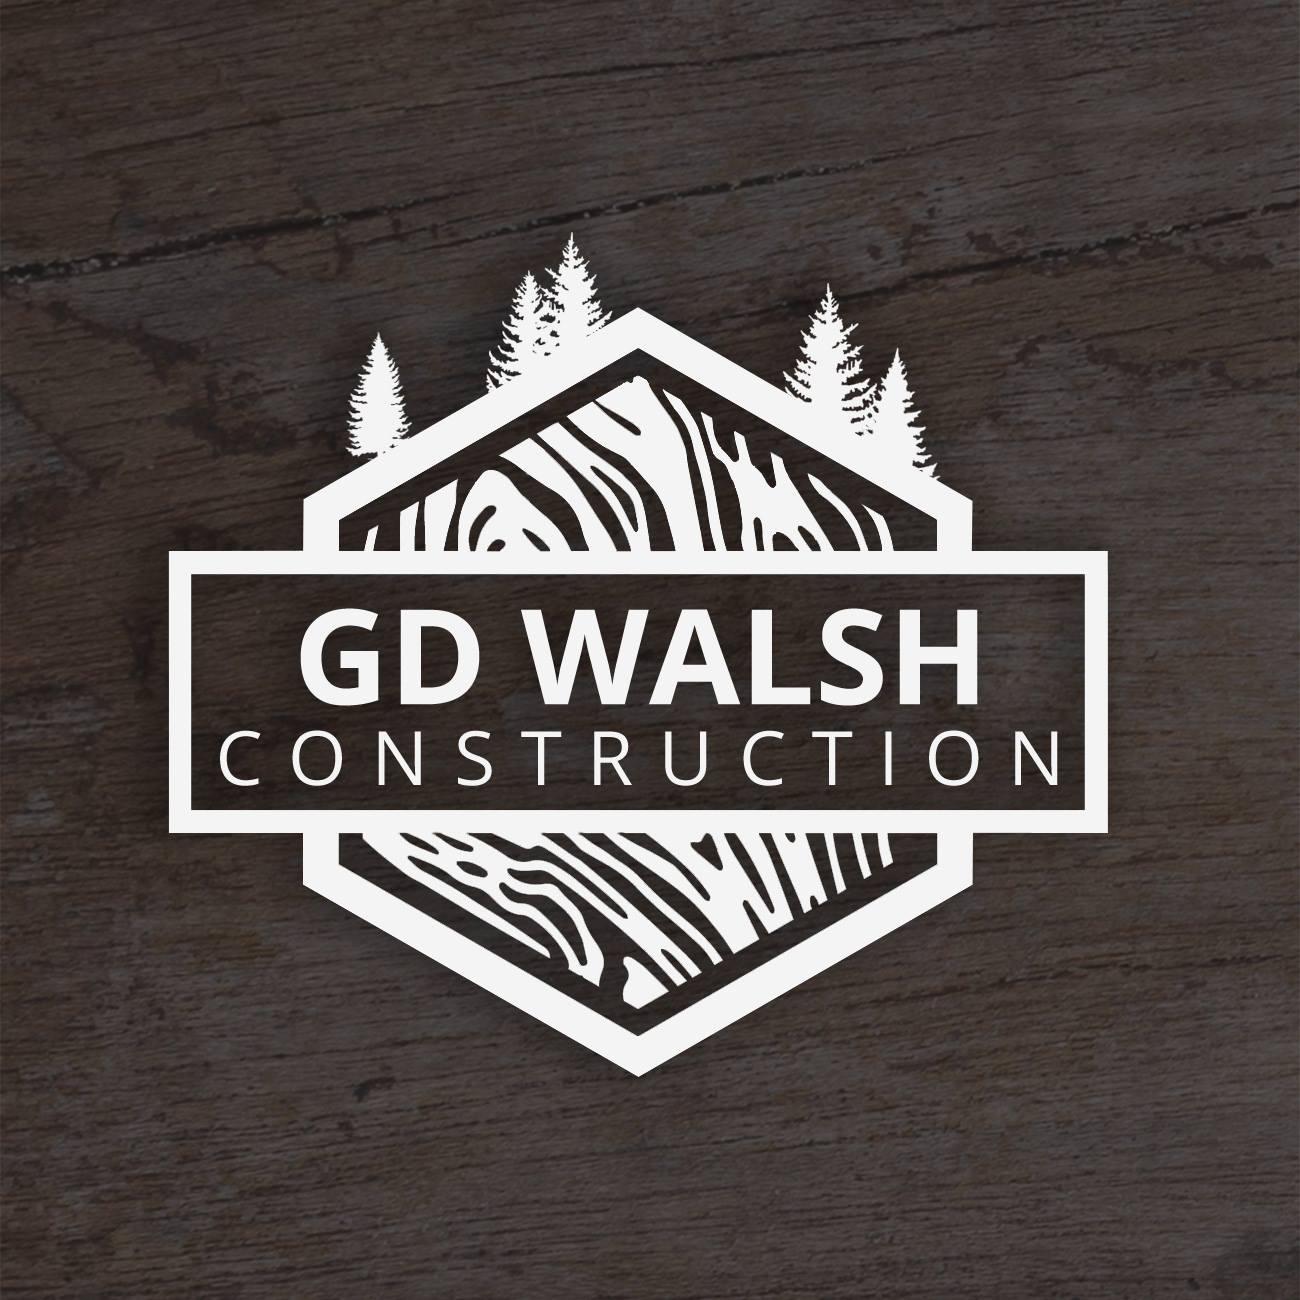 GD Walsh Construction